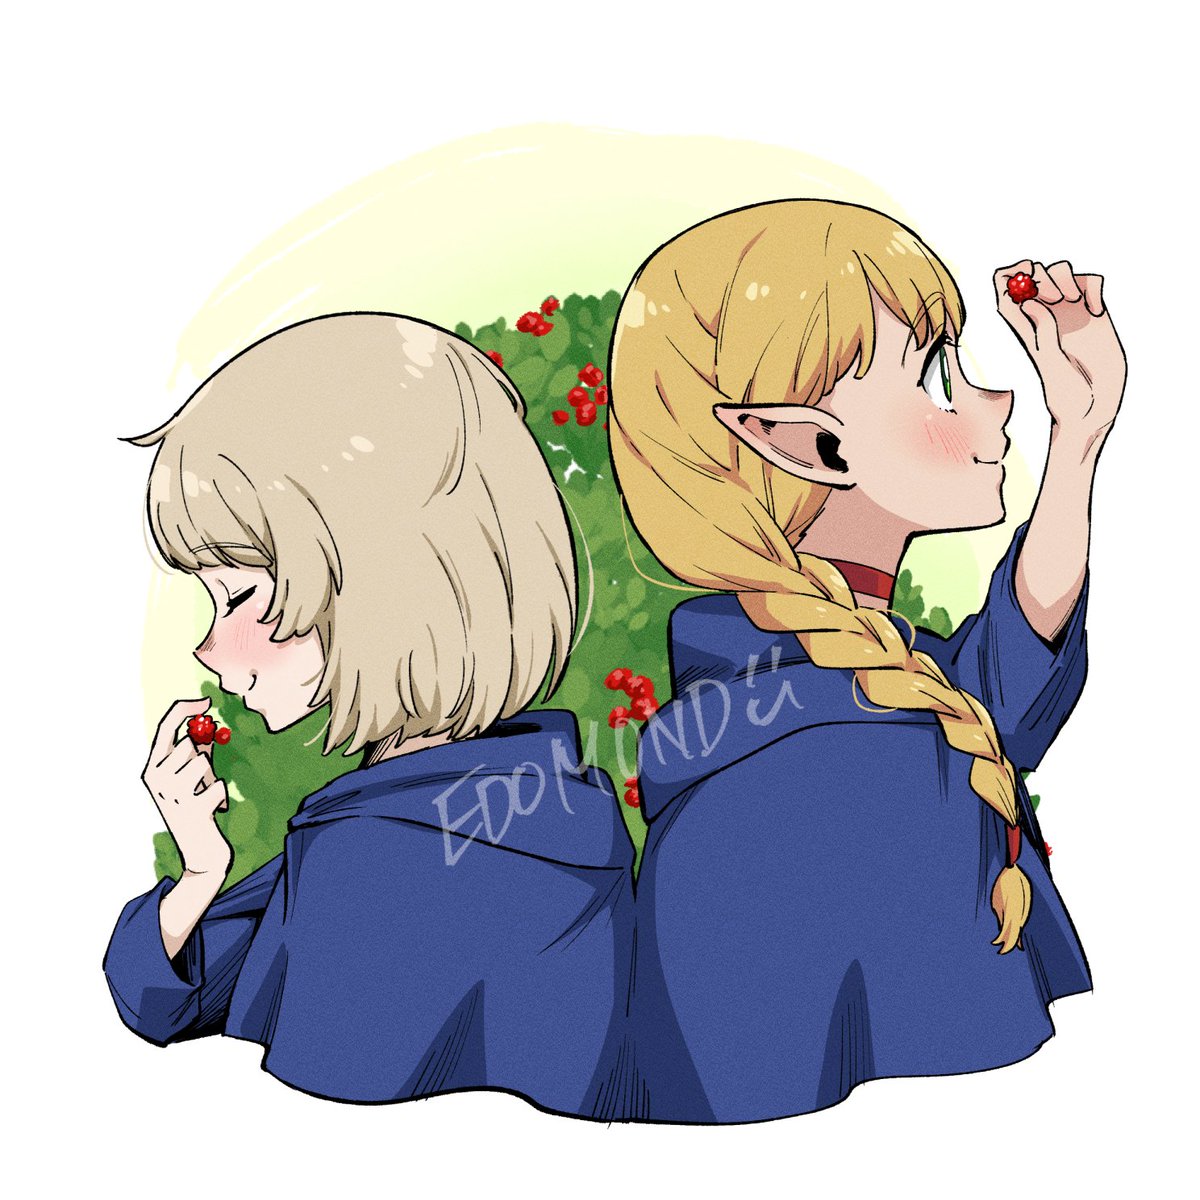 falin thorden ,marcille donato elf pointy ears braid blonde hair berry robe 2girls  illustration images